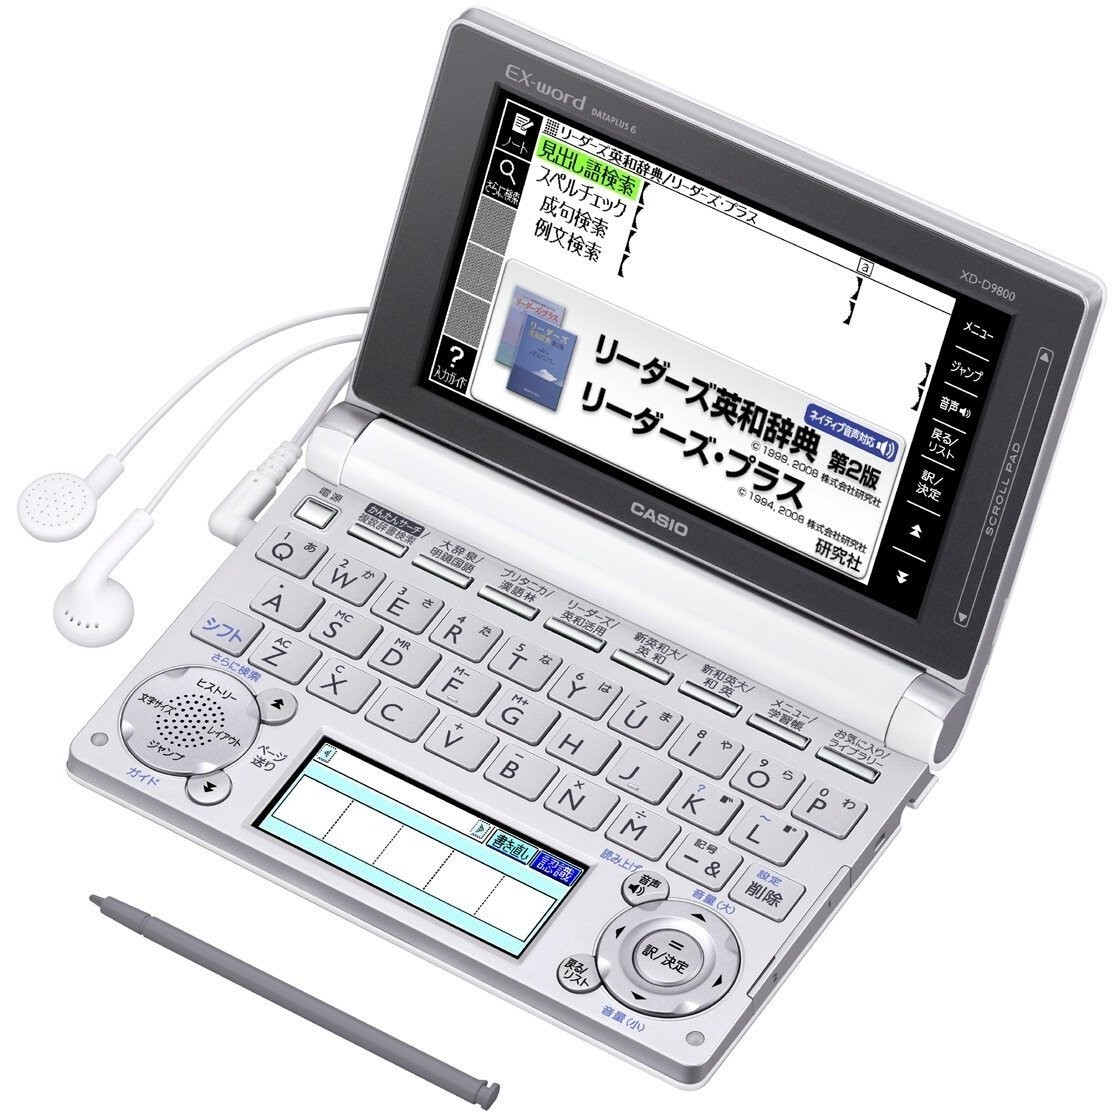 CASIO EX-word XD-D9800WE Japanese English Electronic Dictionary